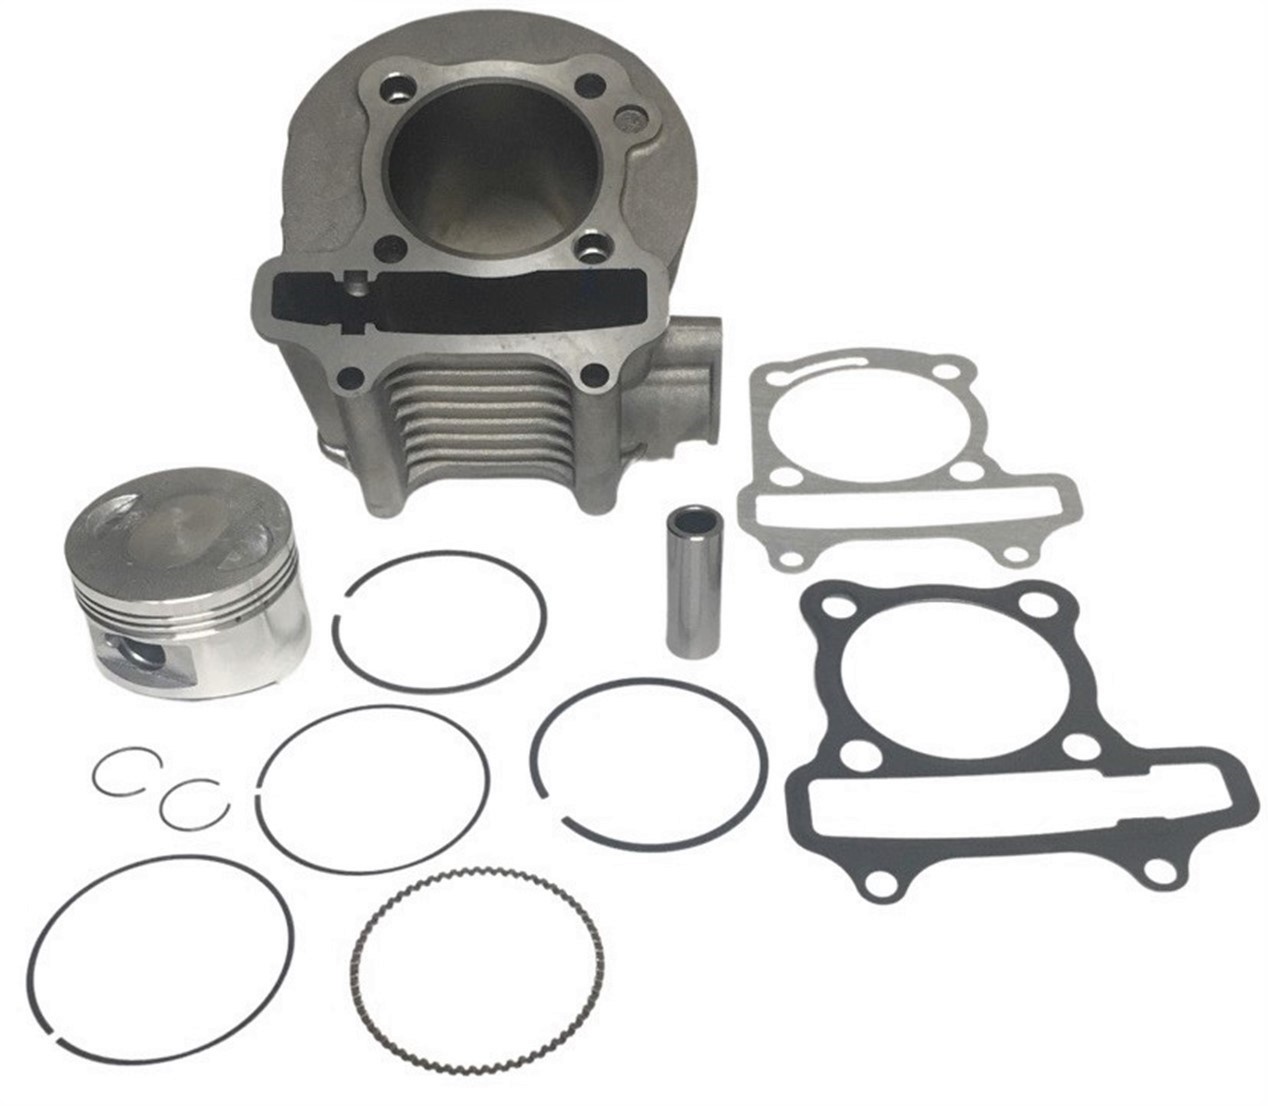 Cylinder Piston Top End Kit Fits GY6-150 ATVs, GoKarts, Scooters, UTVs TYPE 1 Bolt Pattern B=57 H=69